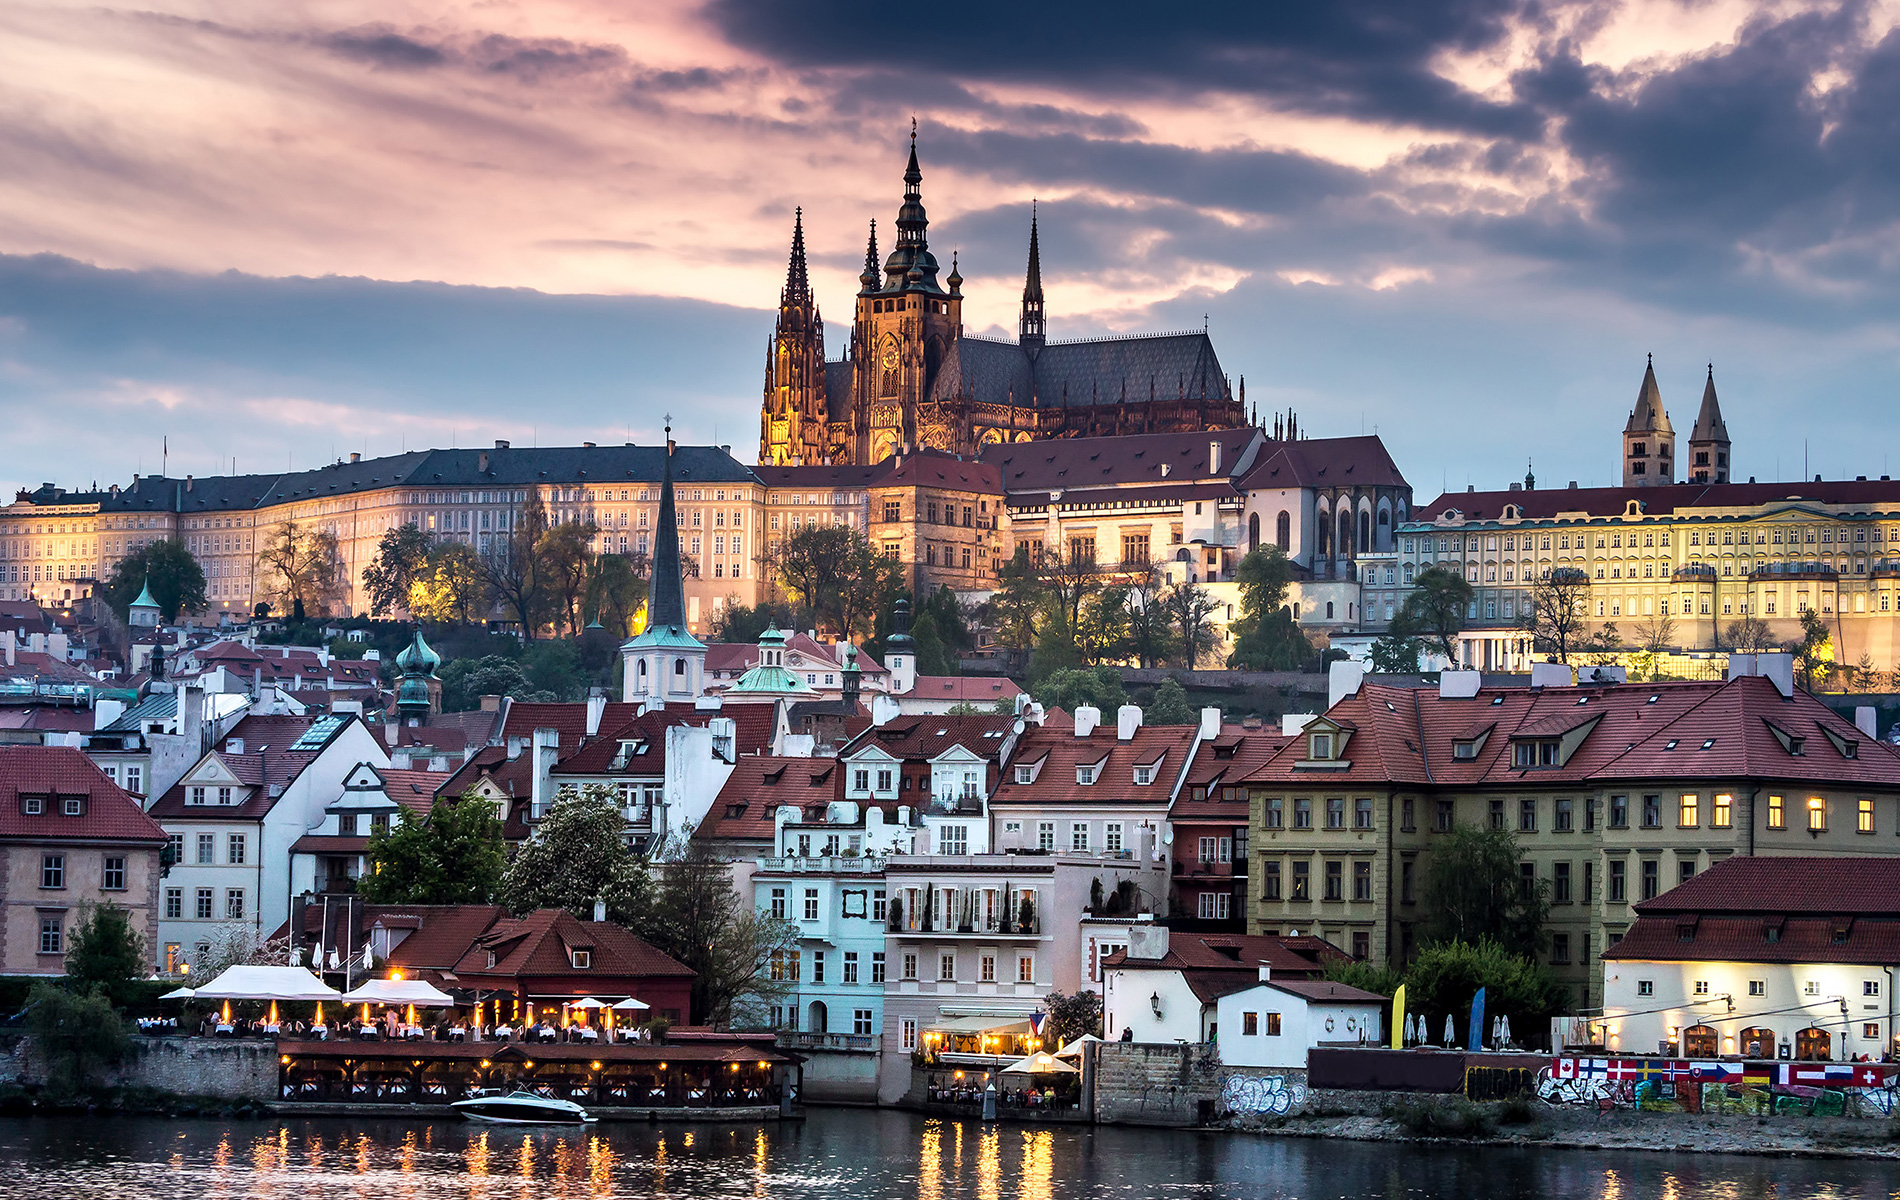 Where does Prague rank compared to other European cities for housing, work, mobility, and entertainment?